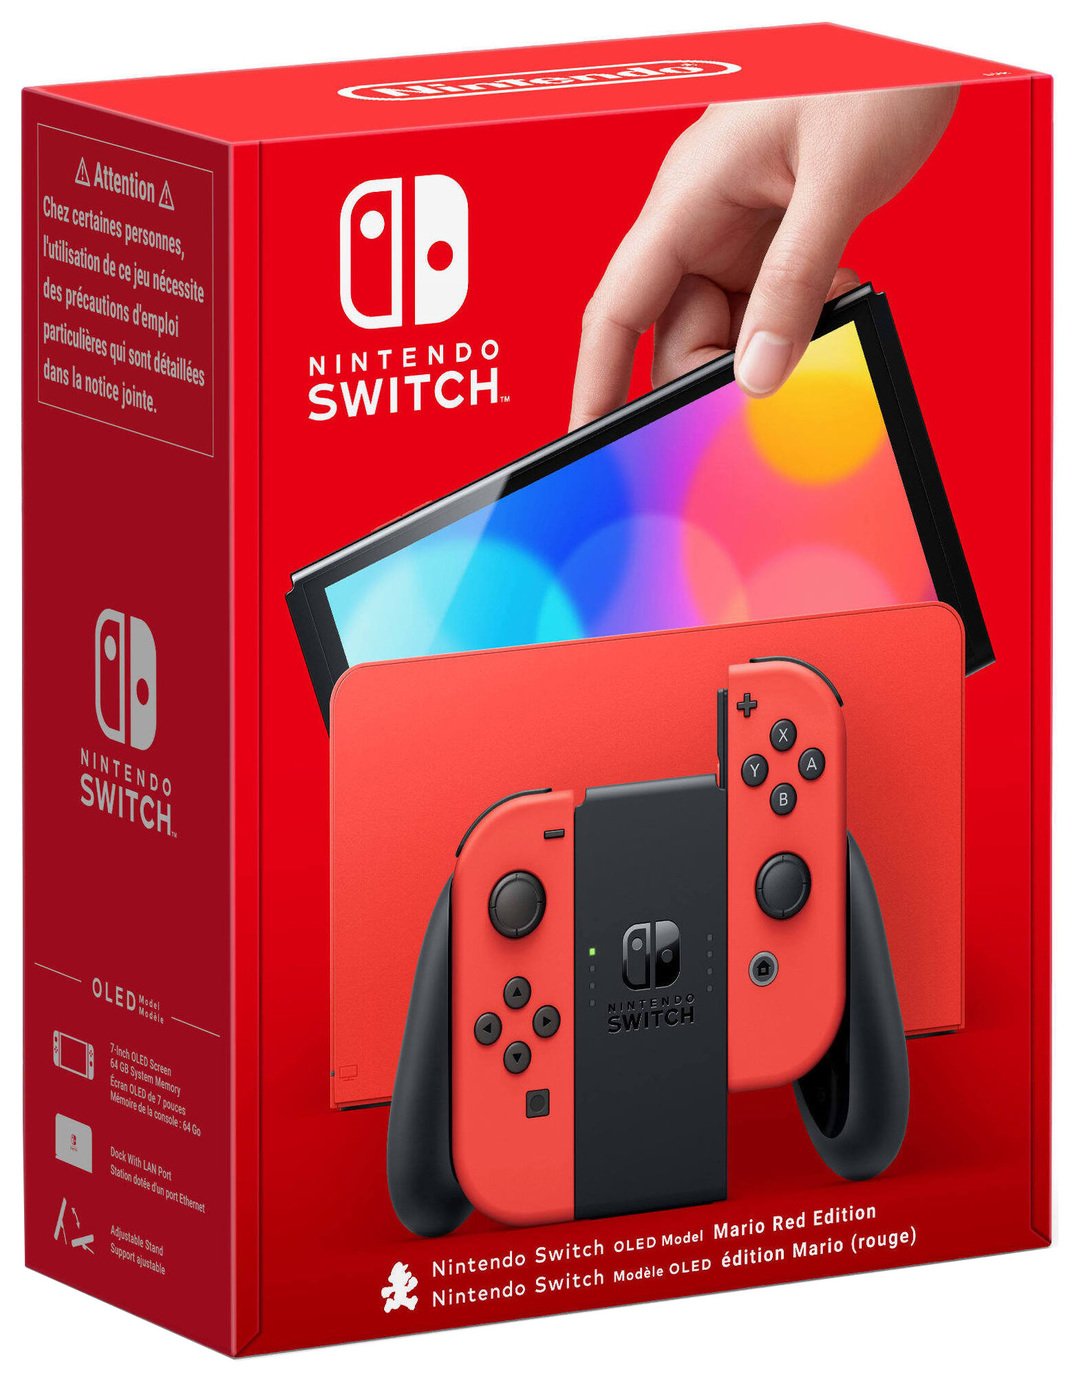 Nintendo Switch 2 release: how much will it cost? - Which? News